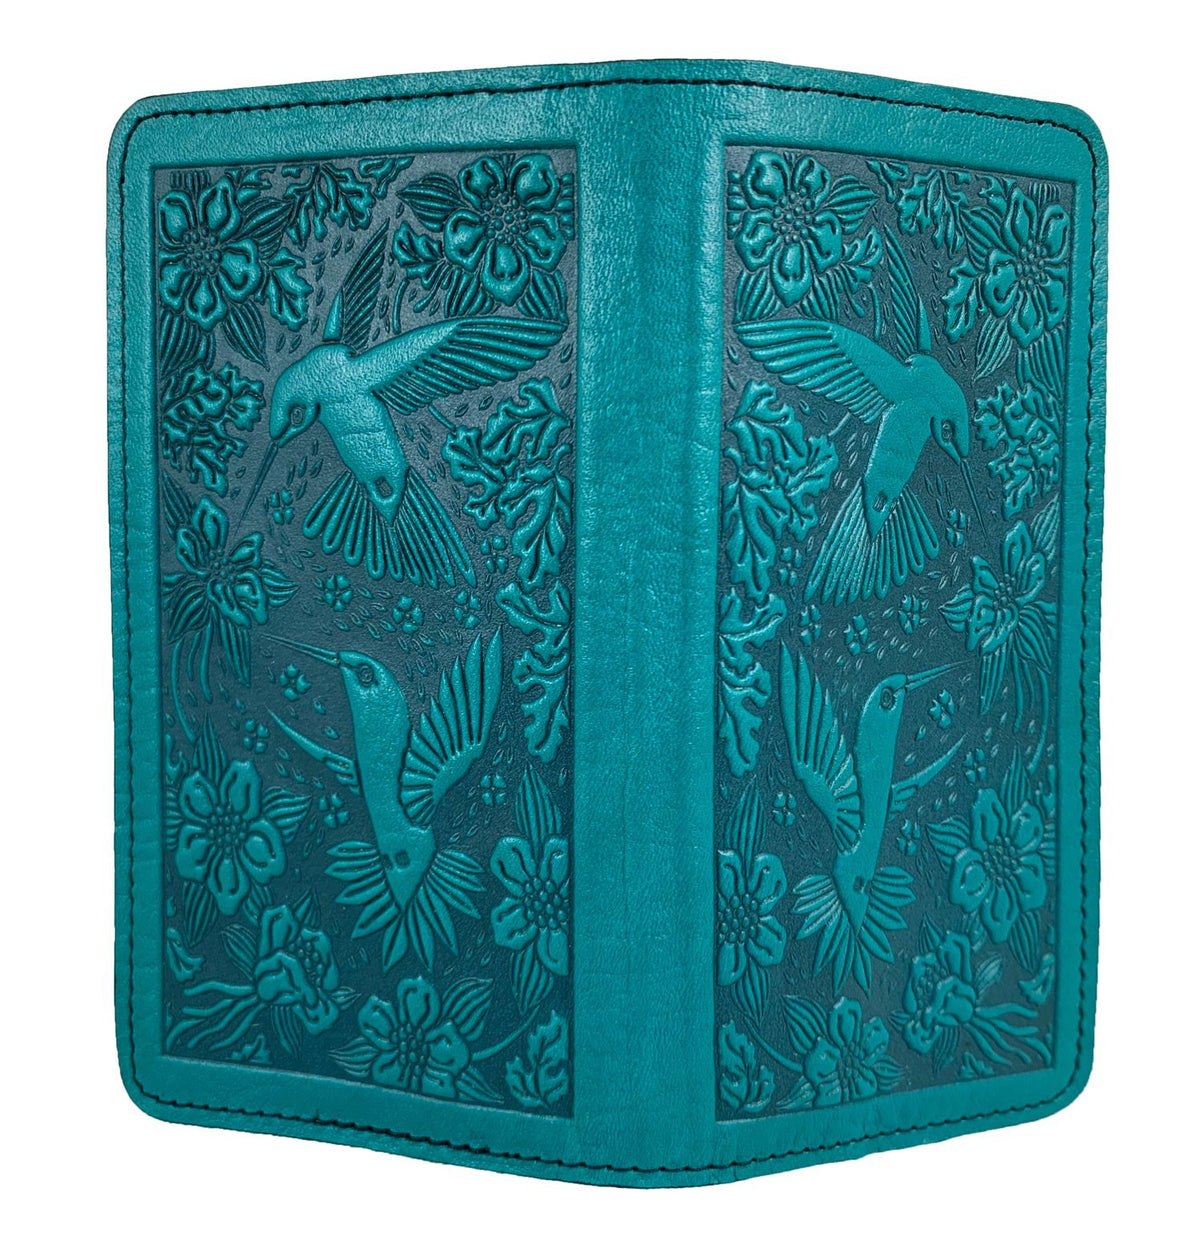 Oberon Design Small Oberon Design Small Leather Smartphone Wallet Case, Hummingbirds in Teal